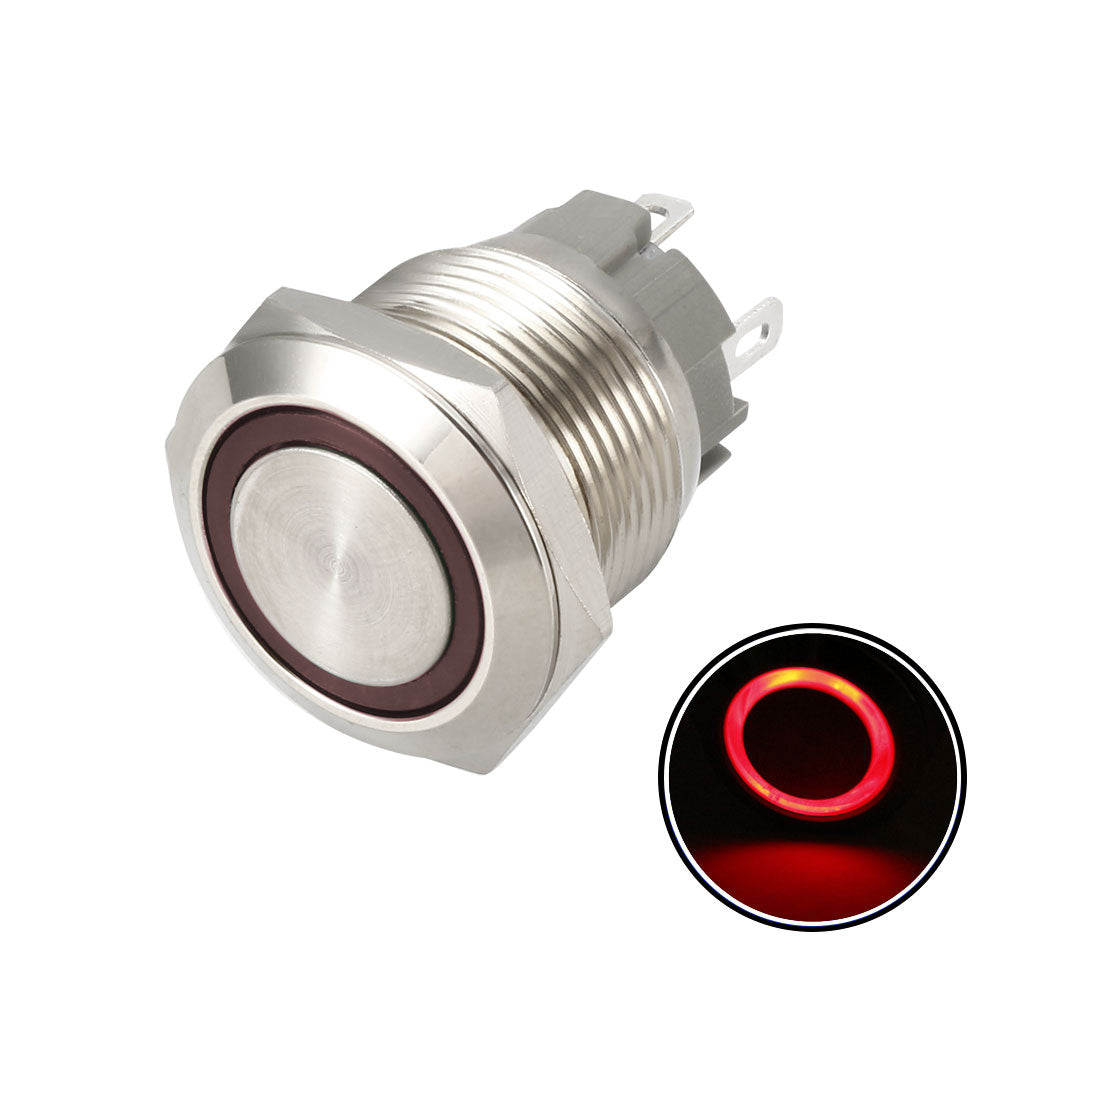 uxcell Uxcell Momentary Metal Push Button Switch 19mm Mounting Dia 1NO 24V Red LED Light 1pcs